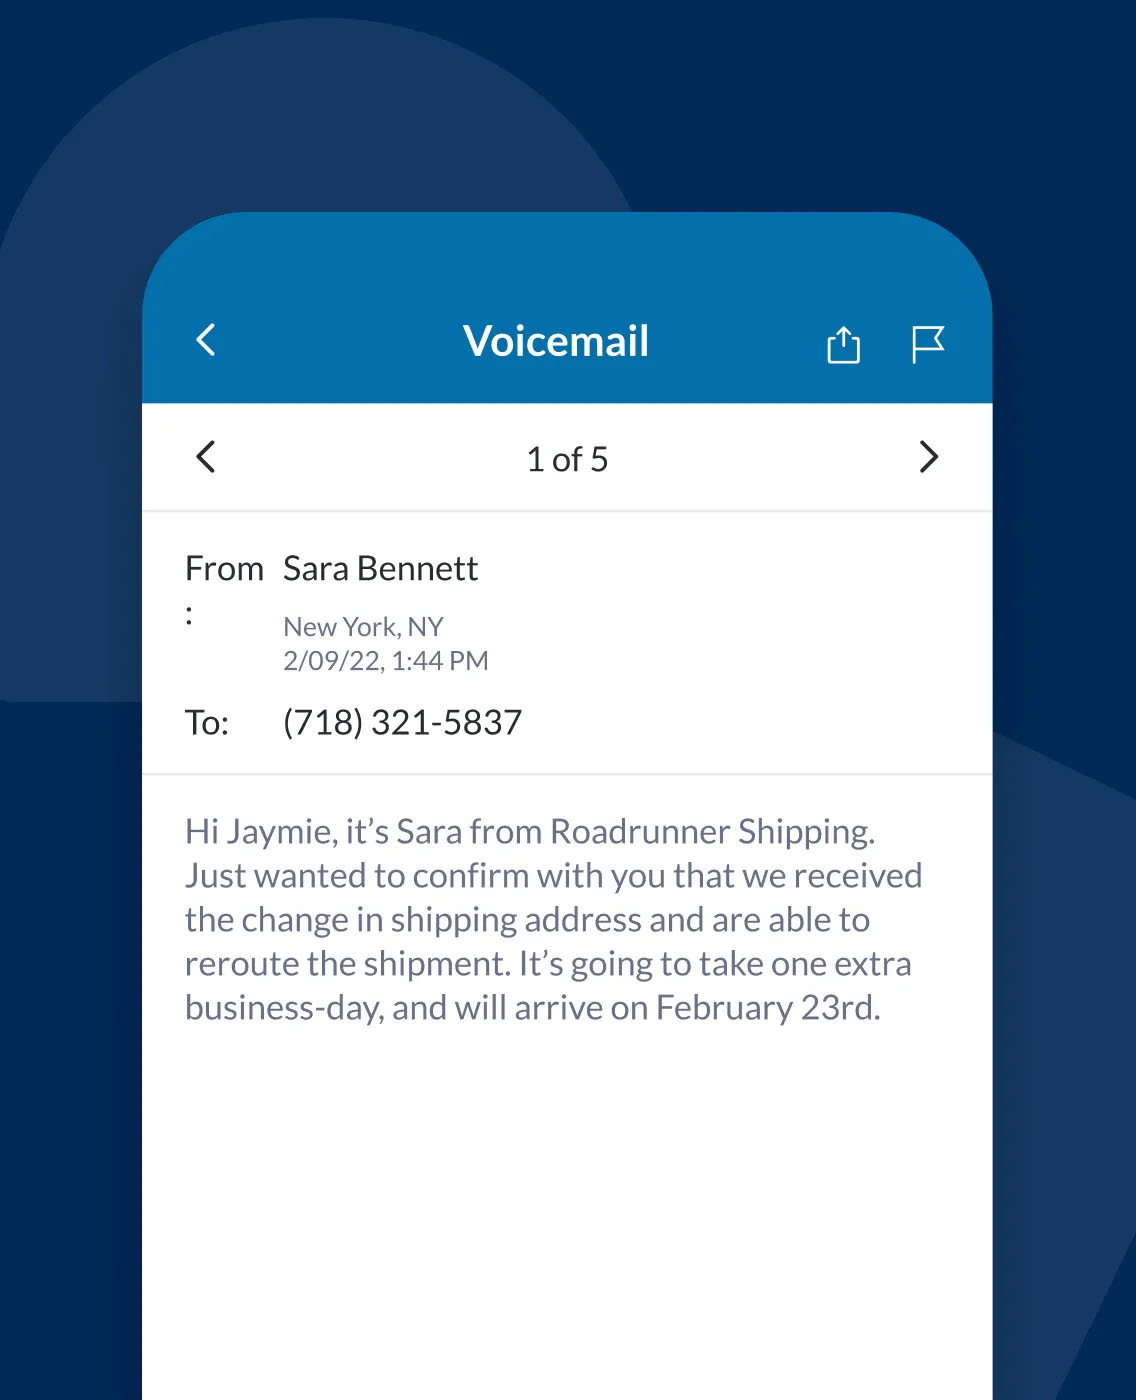 RingCentral interface showing a voicemail transcription.